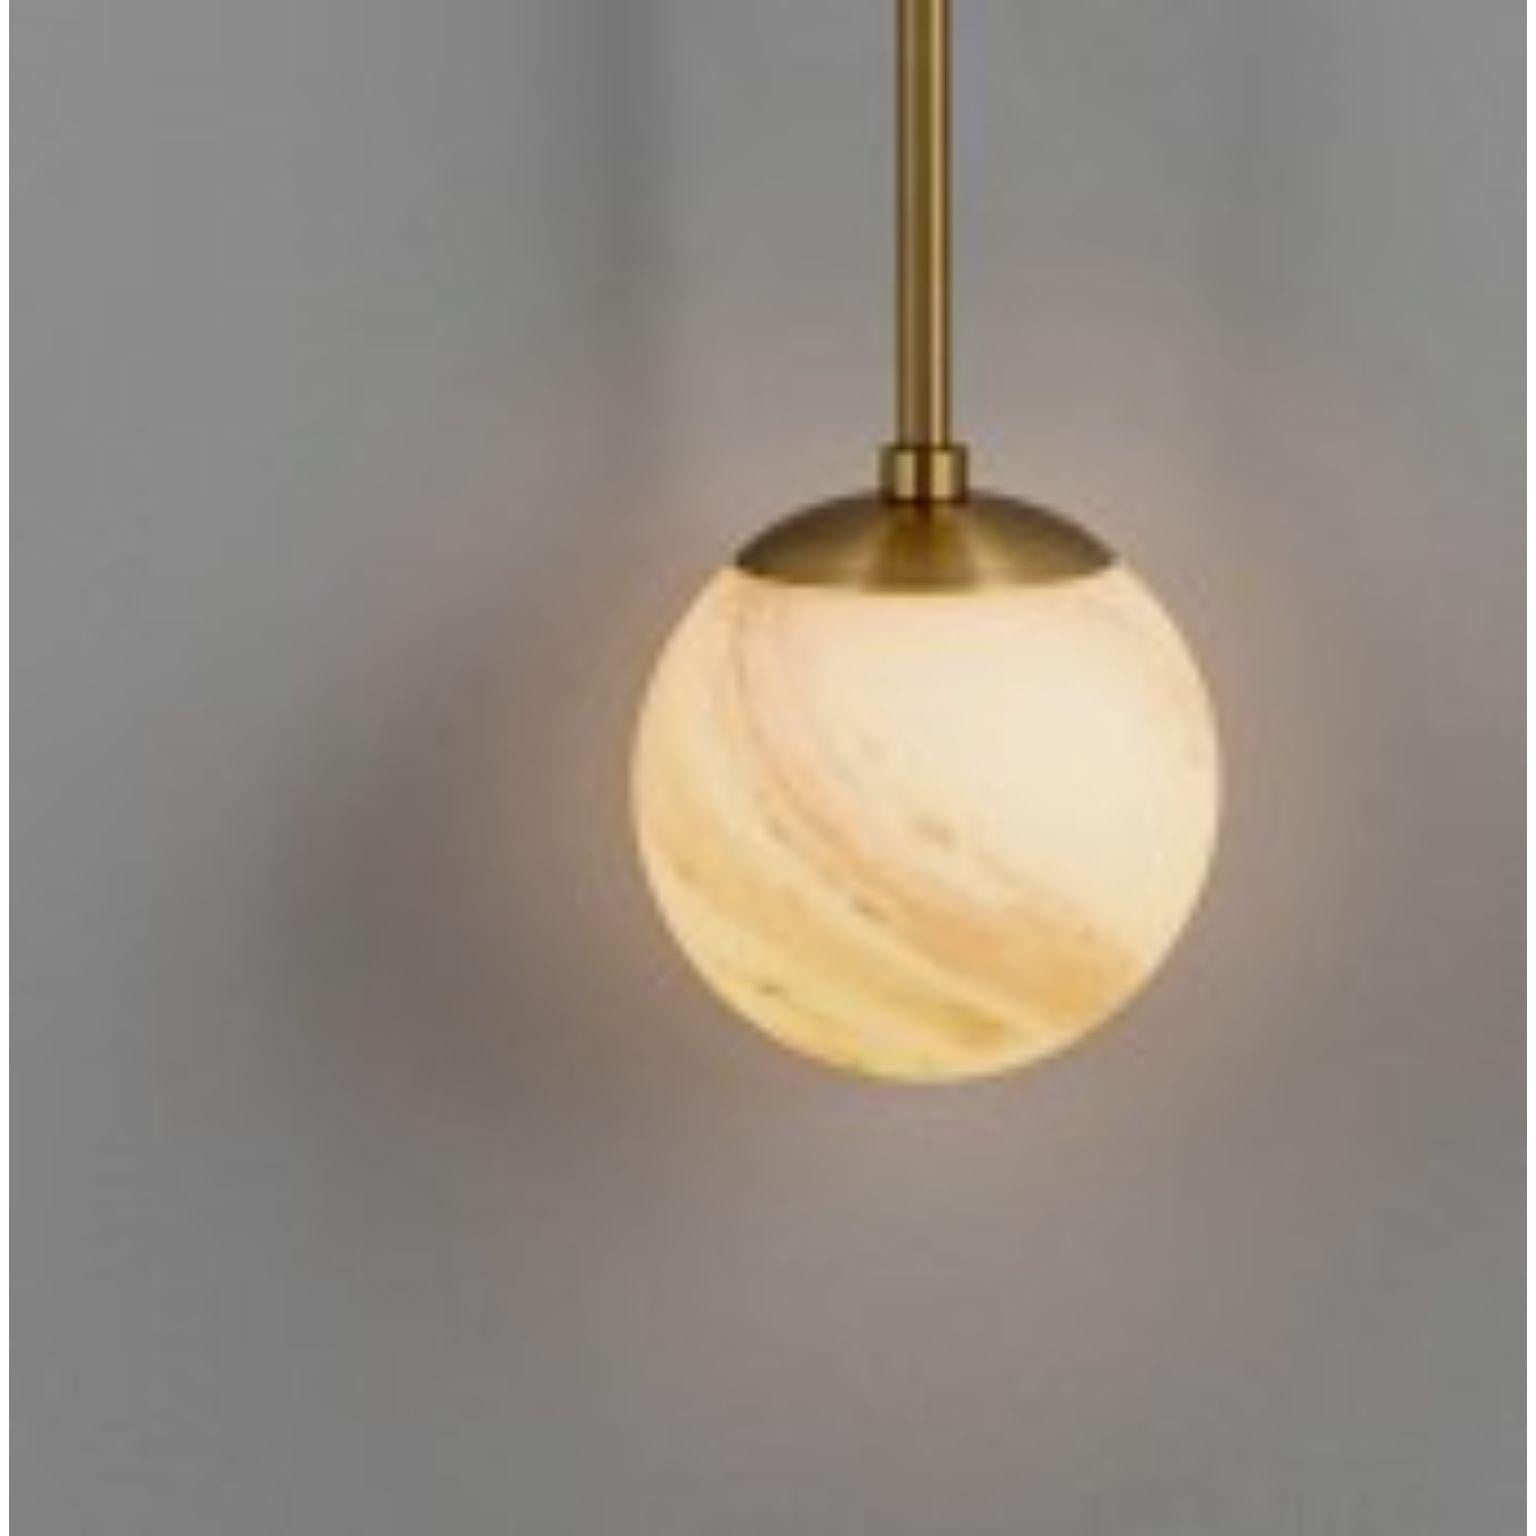 Polish Armstrong Dual Wall Sconce by Schwung